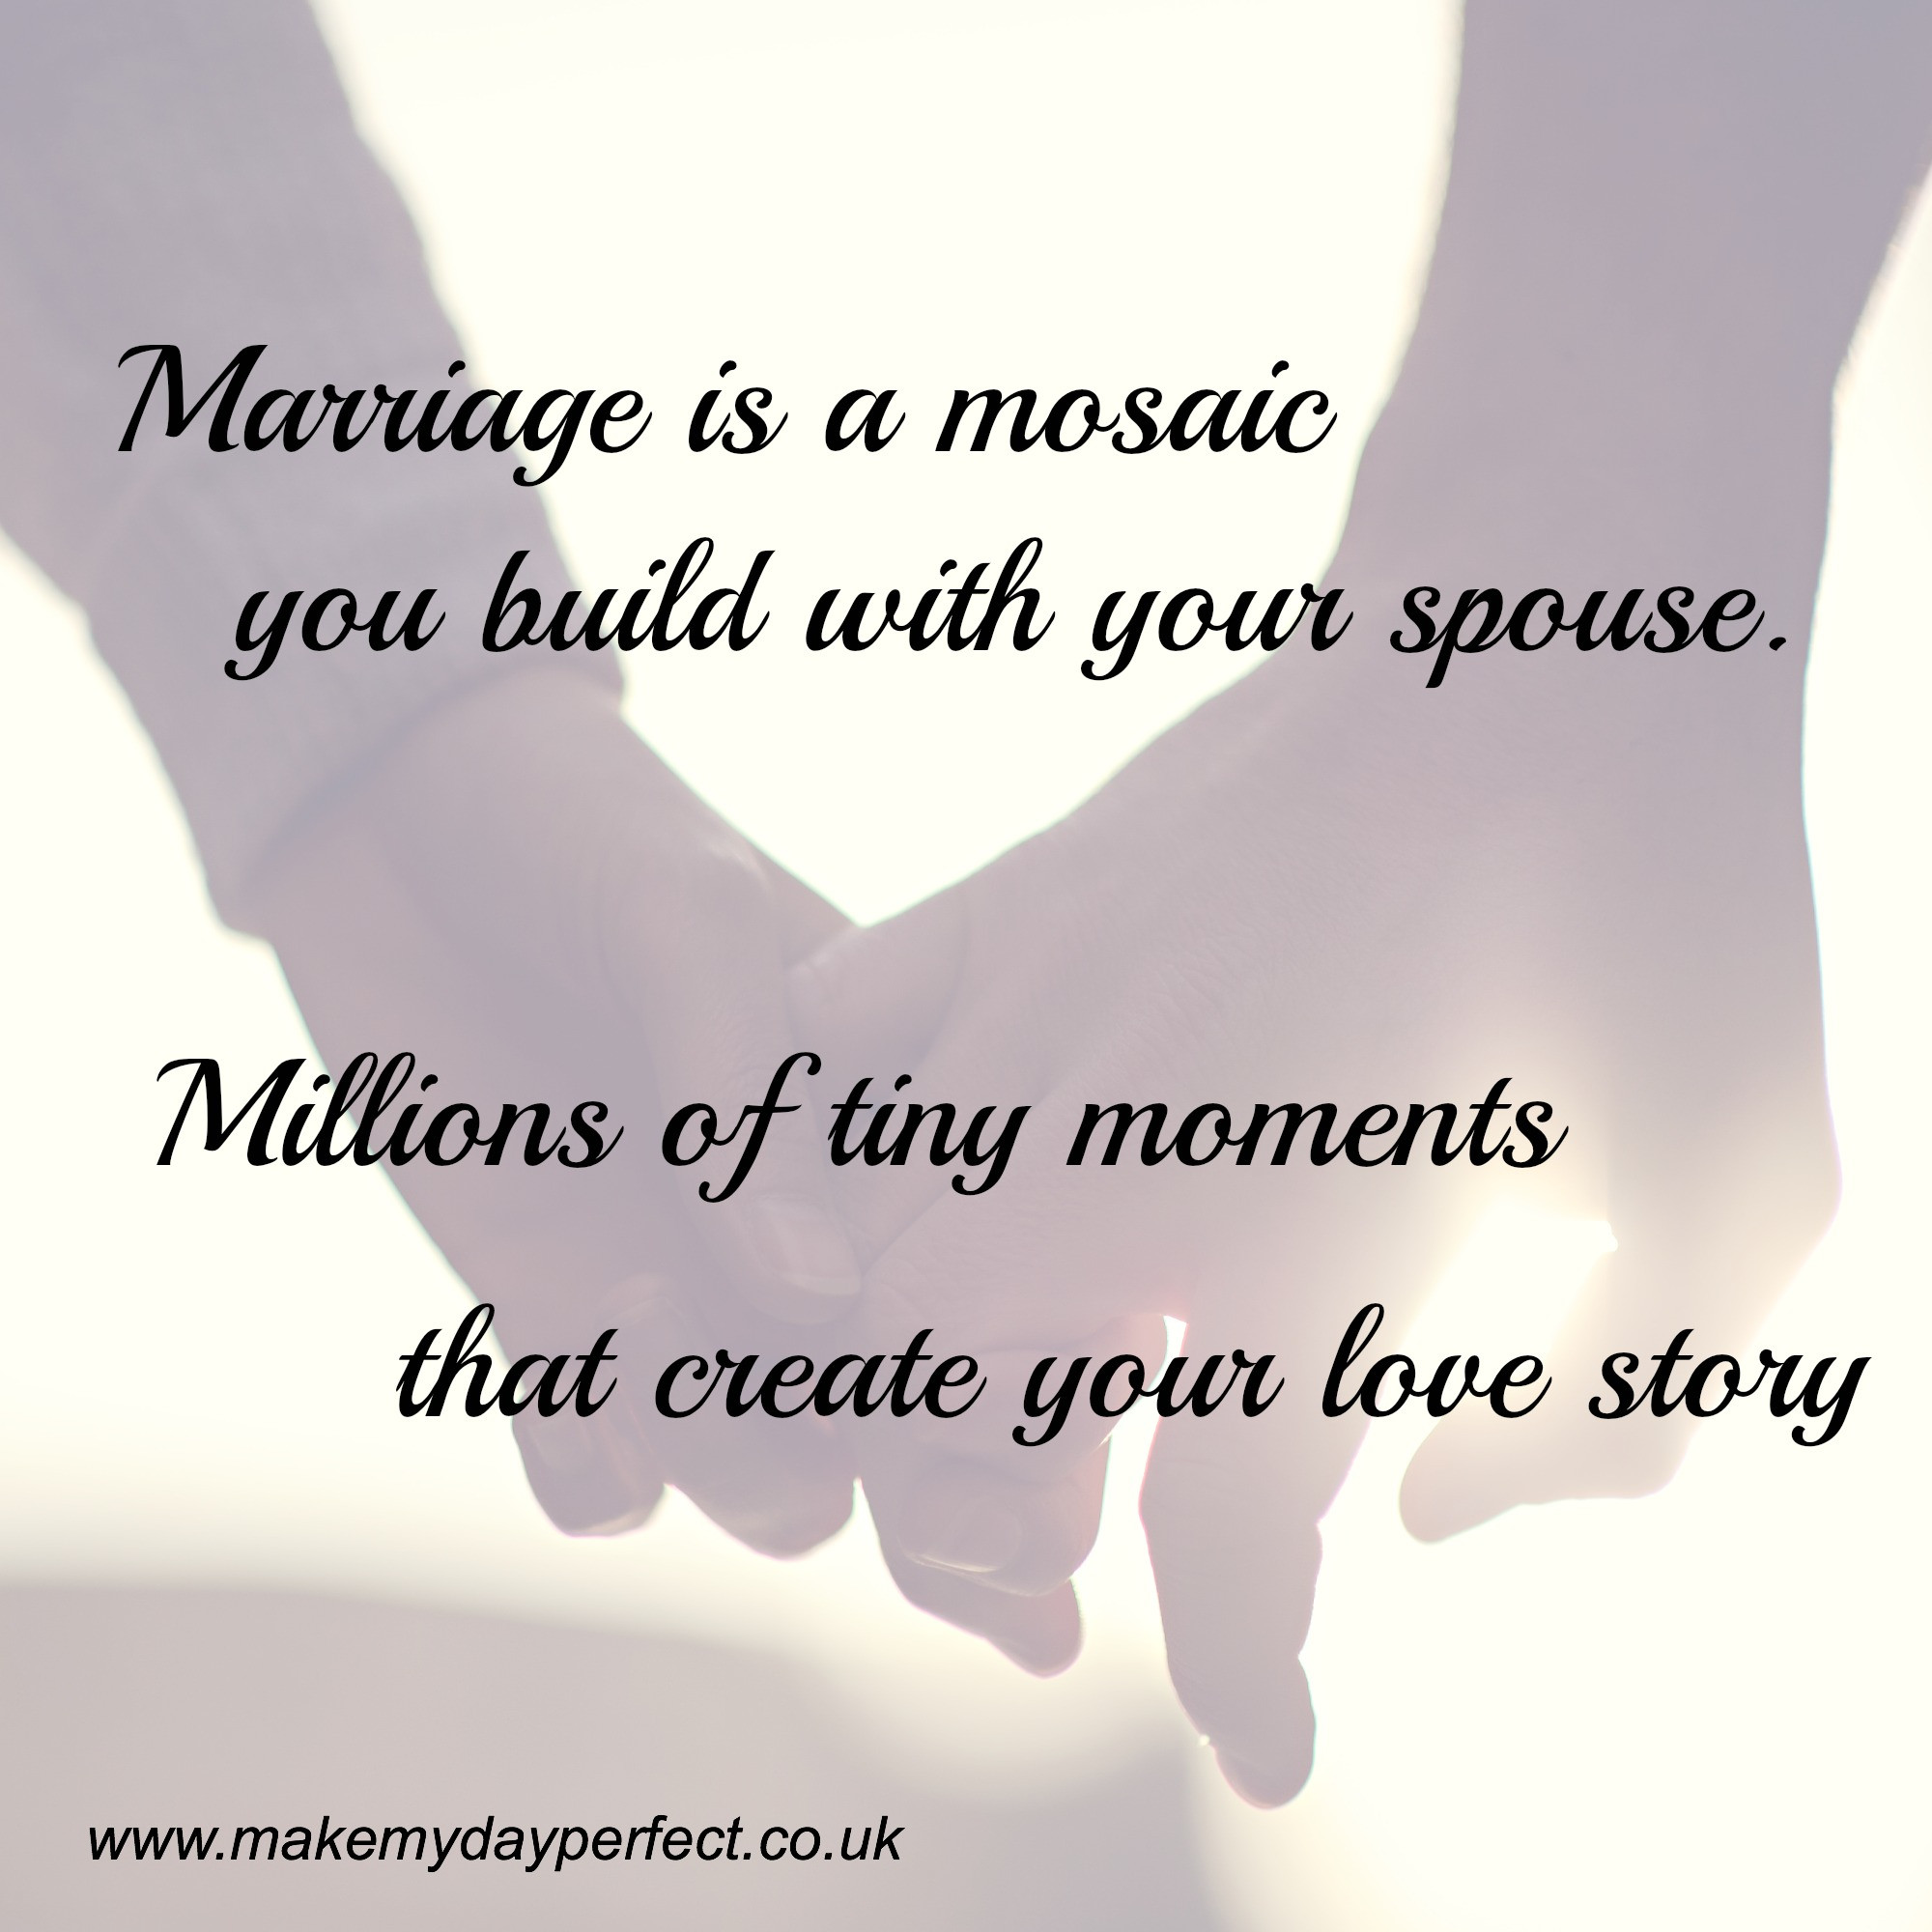 Quote Marriage
 Top 5 marriage quotes that will make you smile